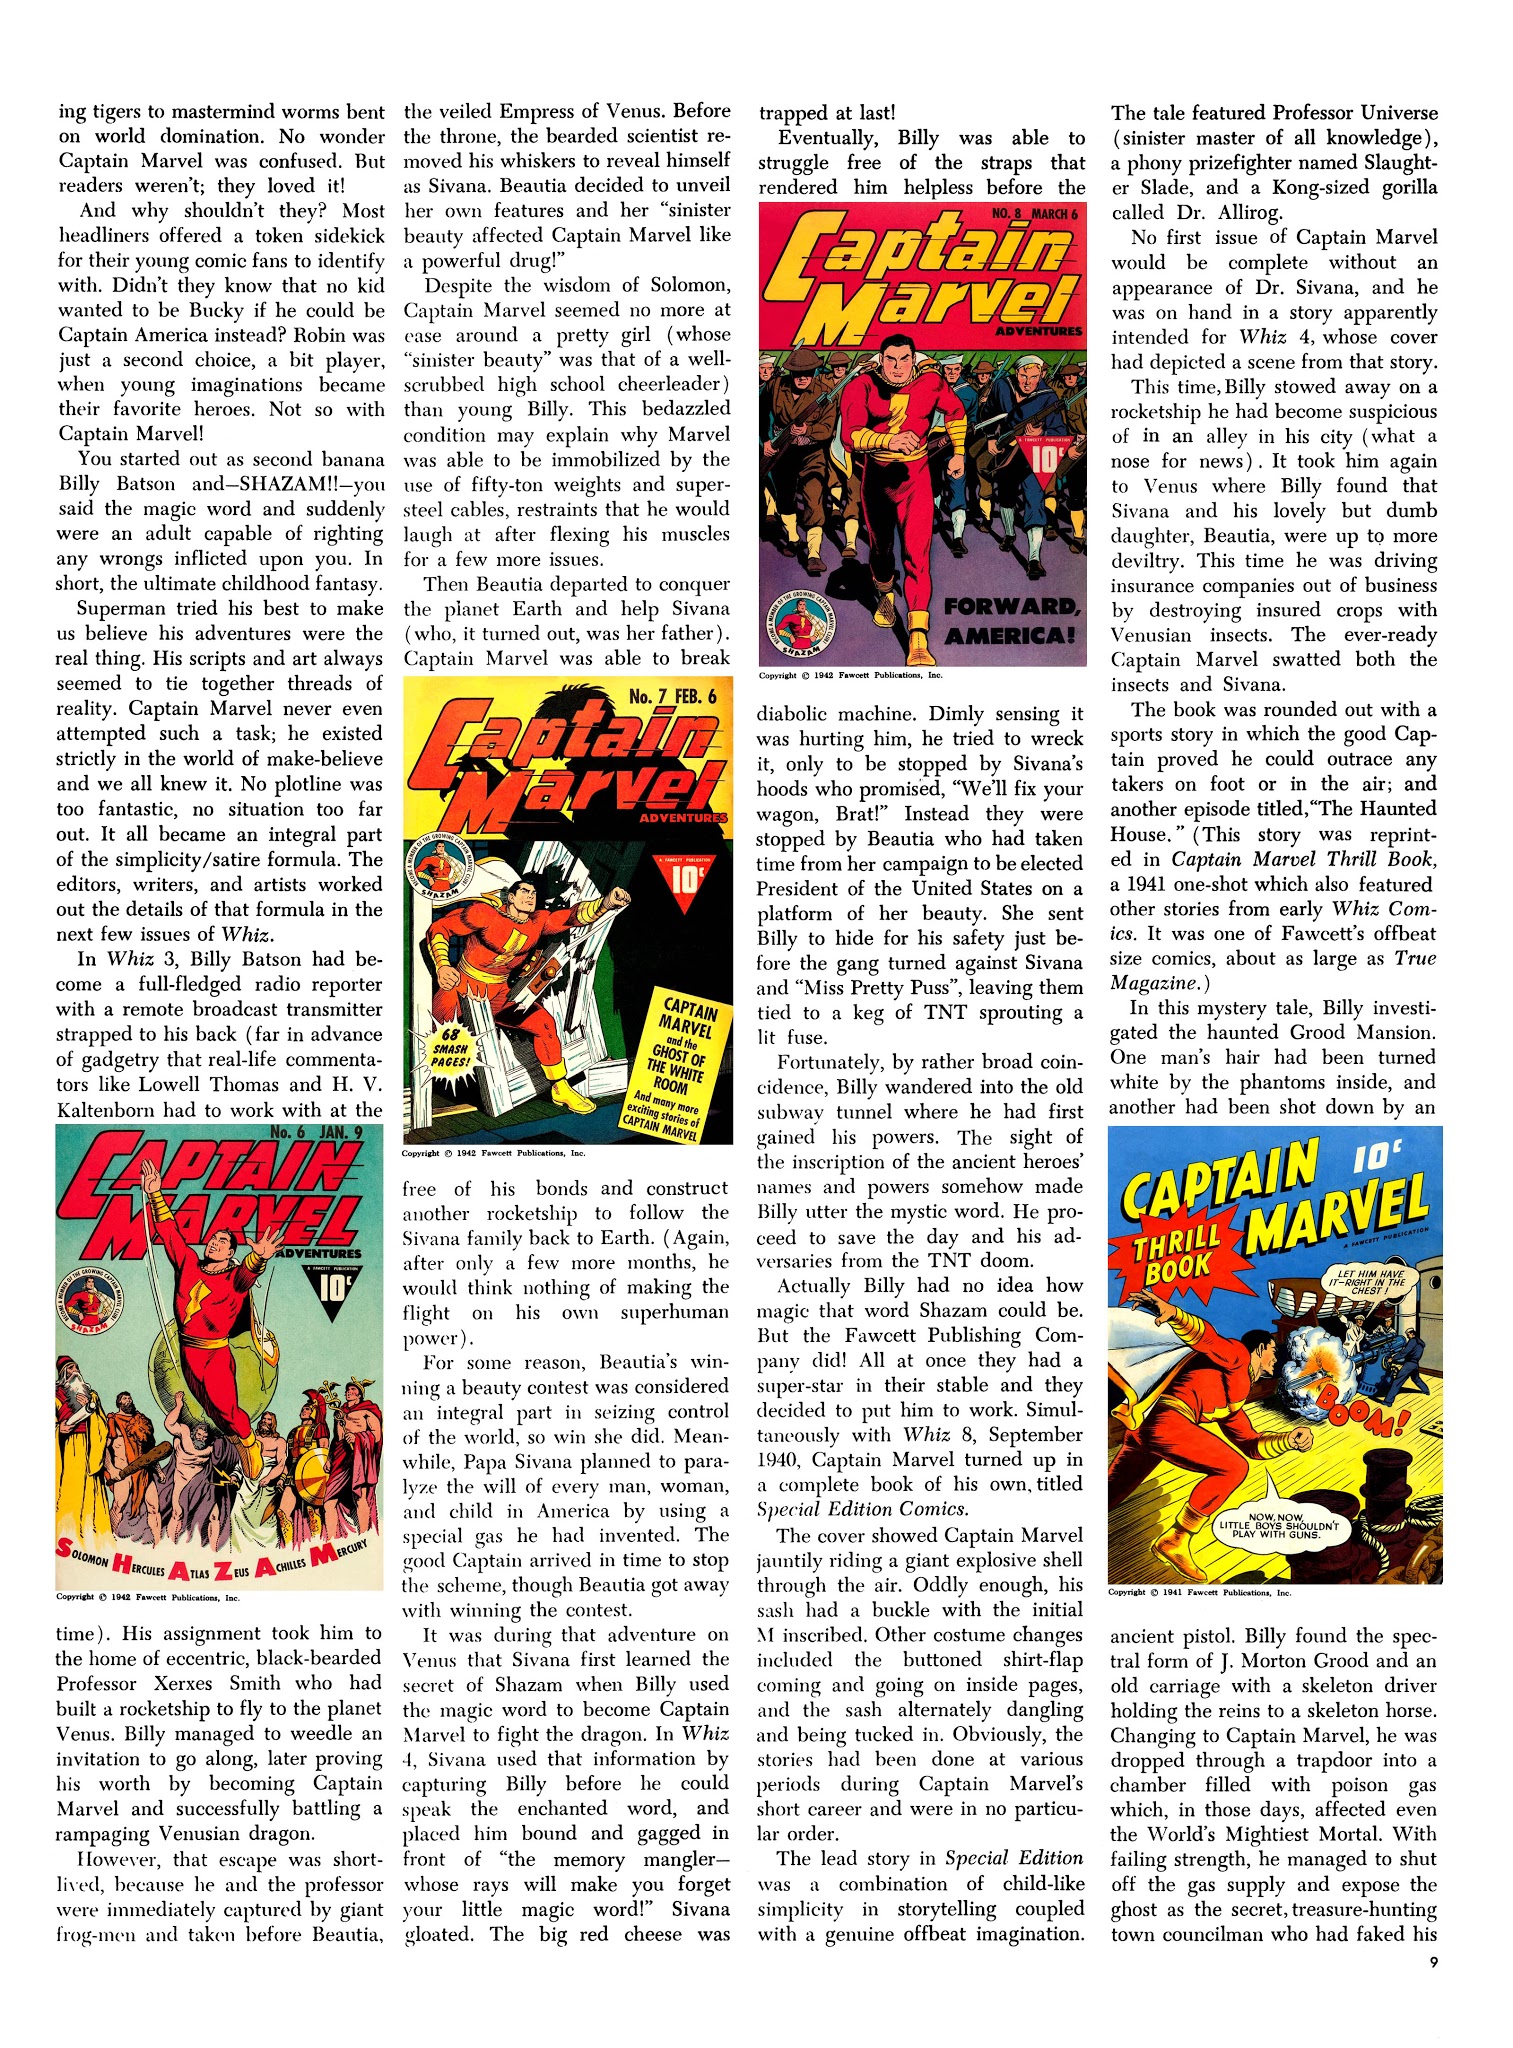 Read online The Steranko History of Comics comic -  Issue # TPB 2 - 10